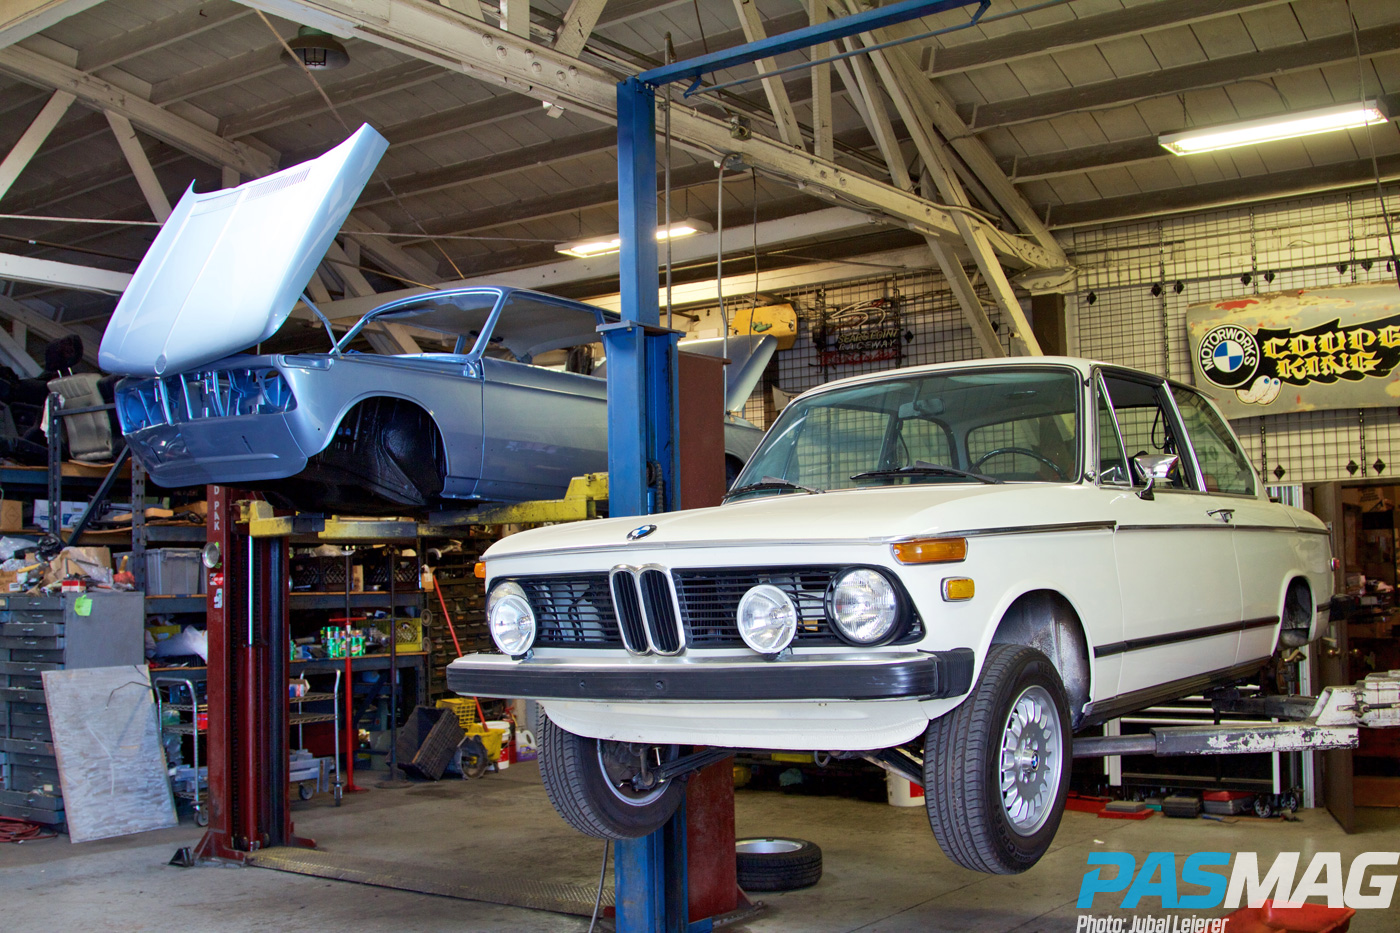 Aught Two: Clarion Builds' Iconic Restoration - 1974 BMW 2002 (Photo by Jubal Leierer)